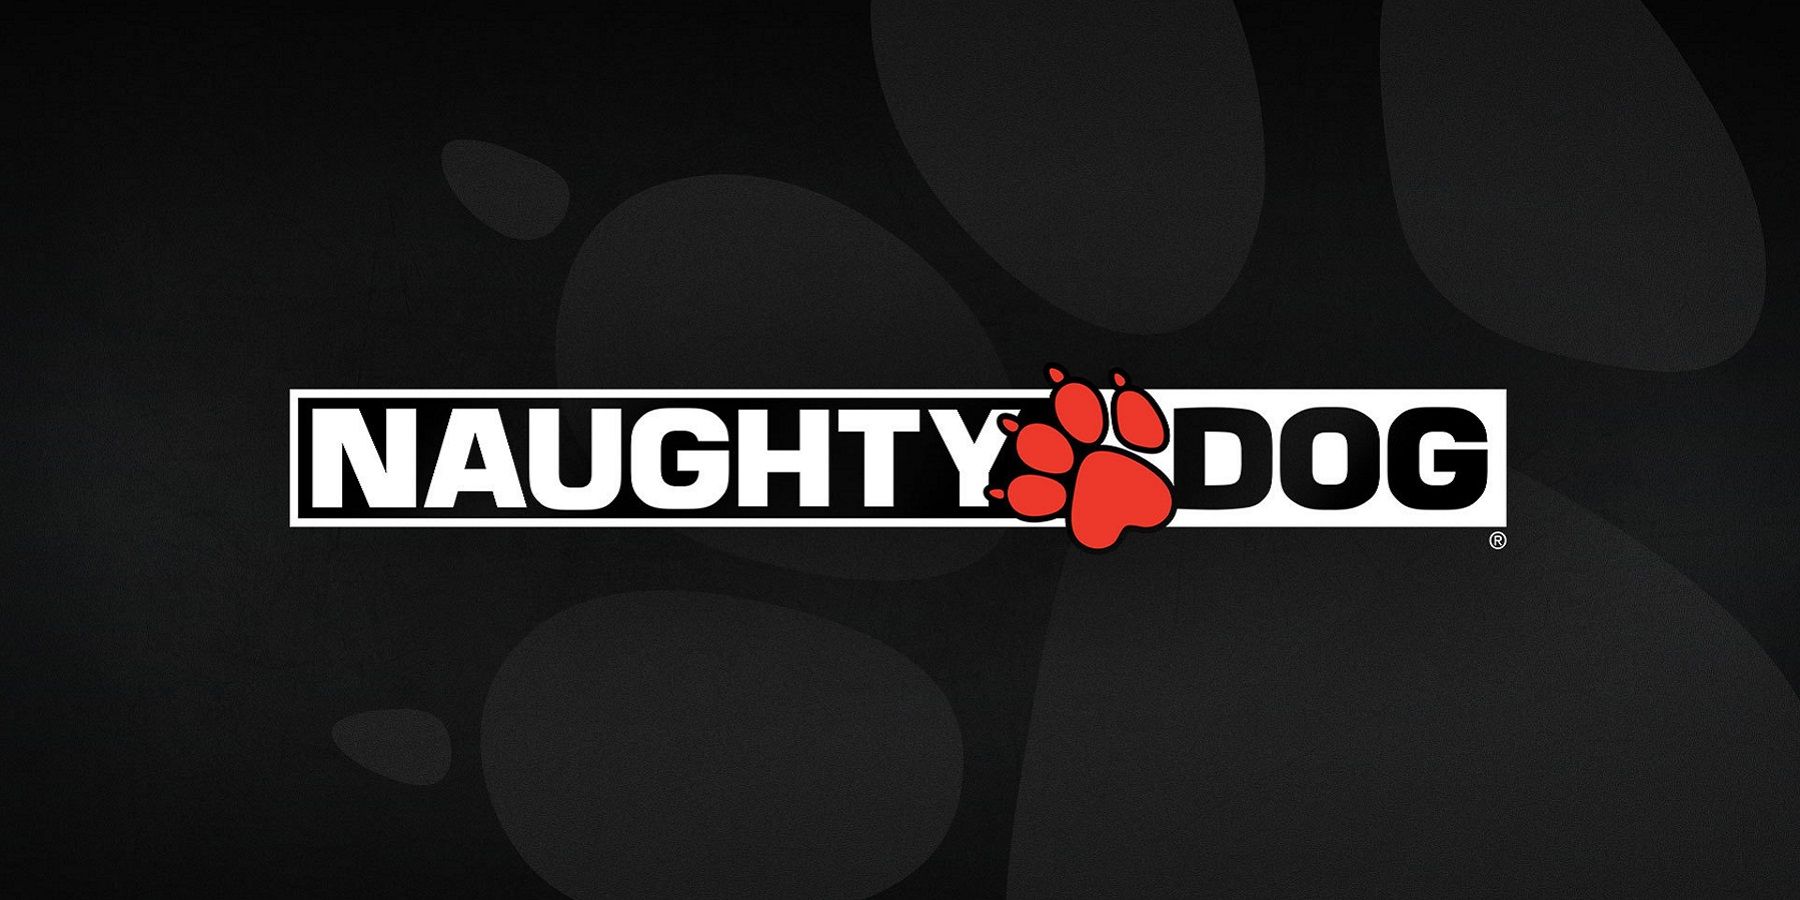 The Naughty Dog logo on a black background with a grey paw behind it.